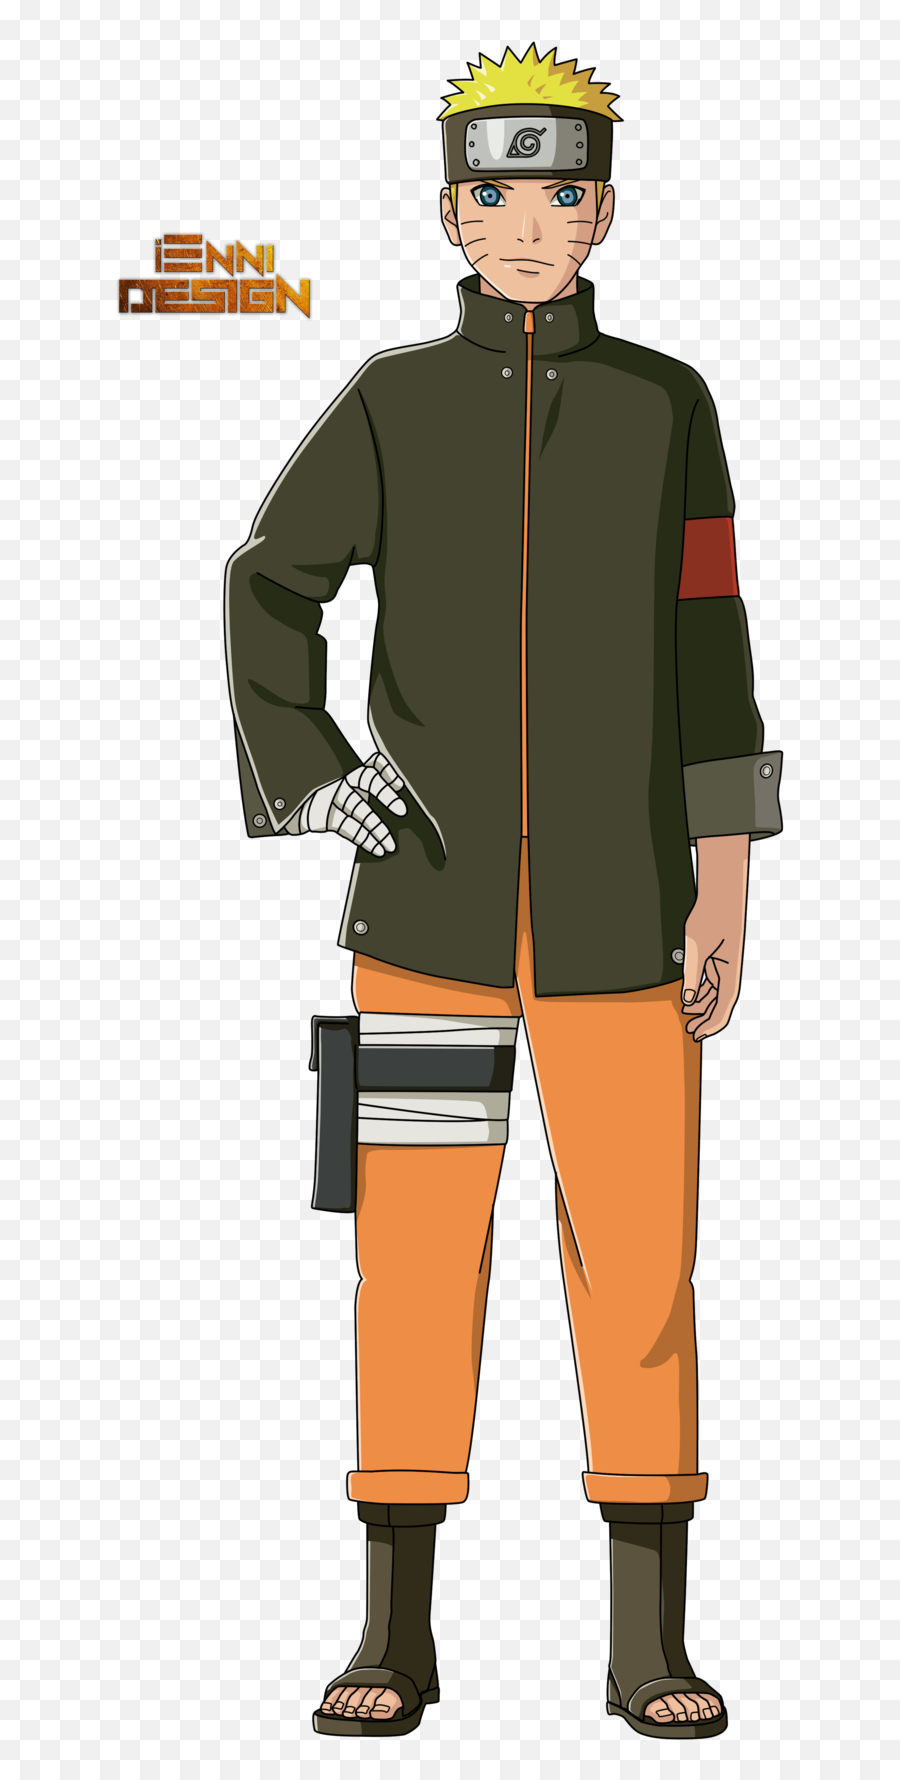 Transparent Hq Png Image - Last Naruto The Movie Naruto,Naruto Logo Transparent